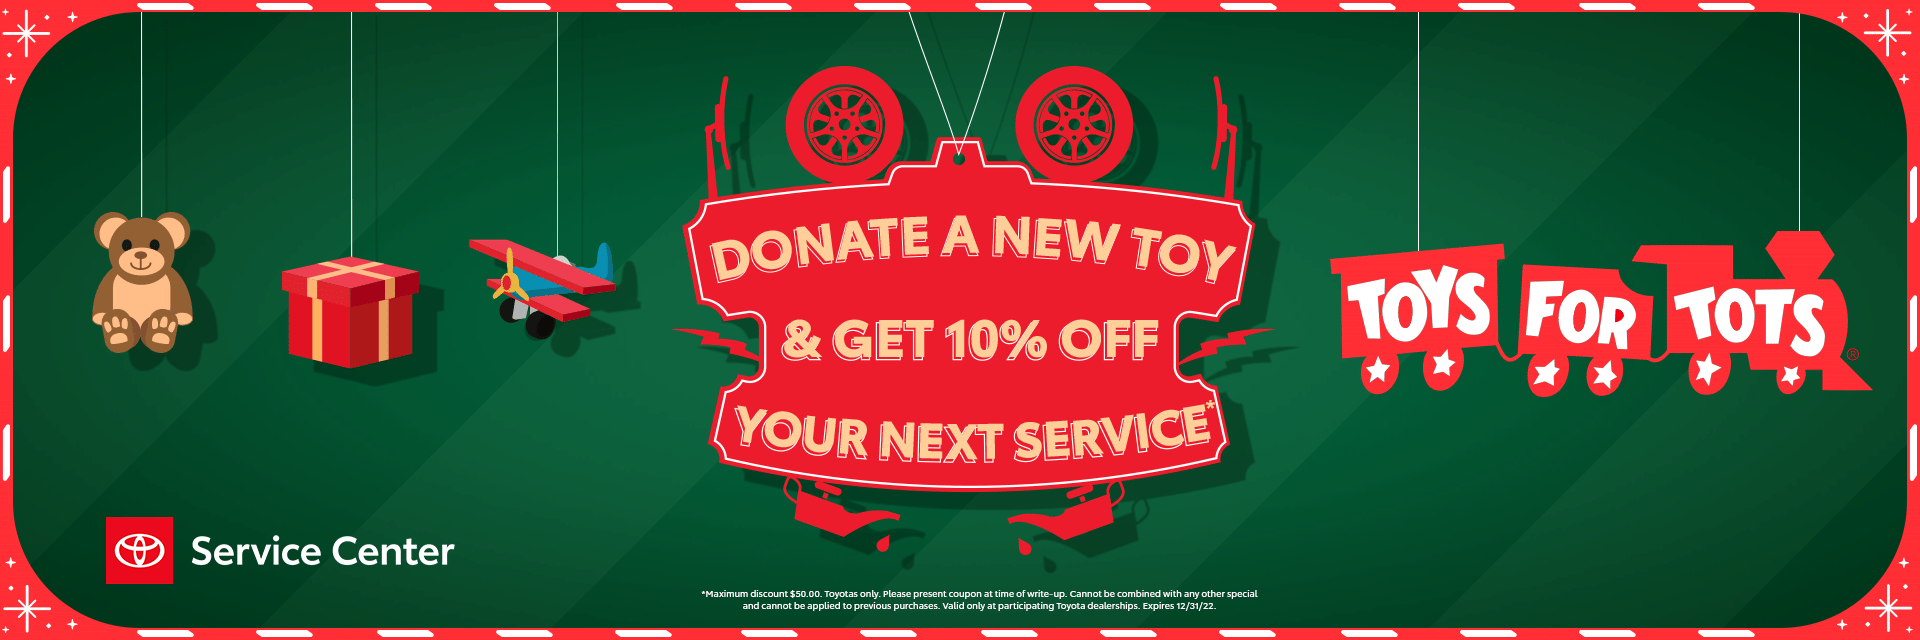 Donate a new toy and get 10% off your next service